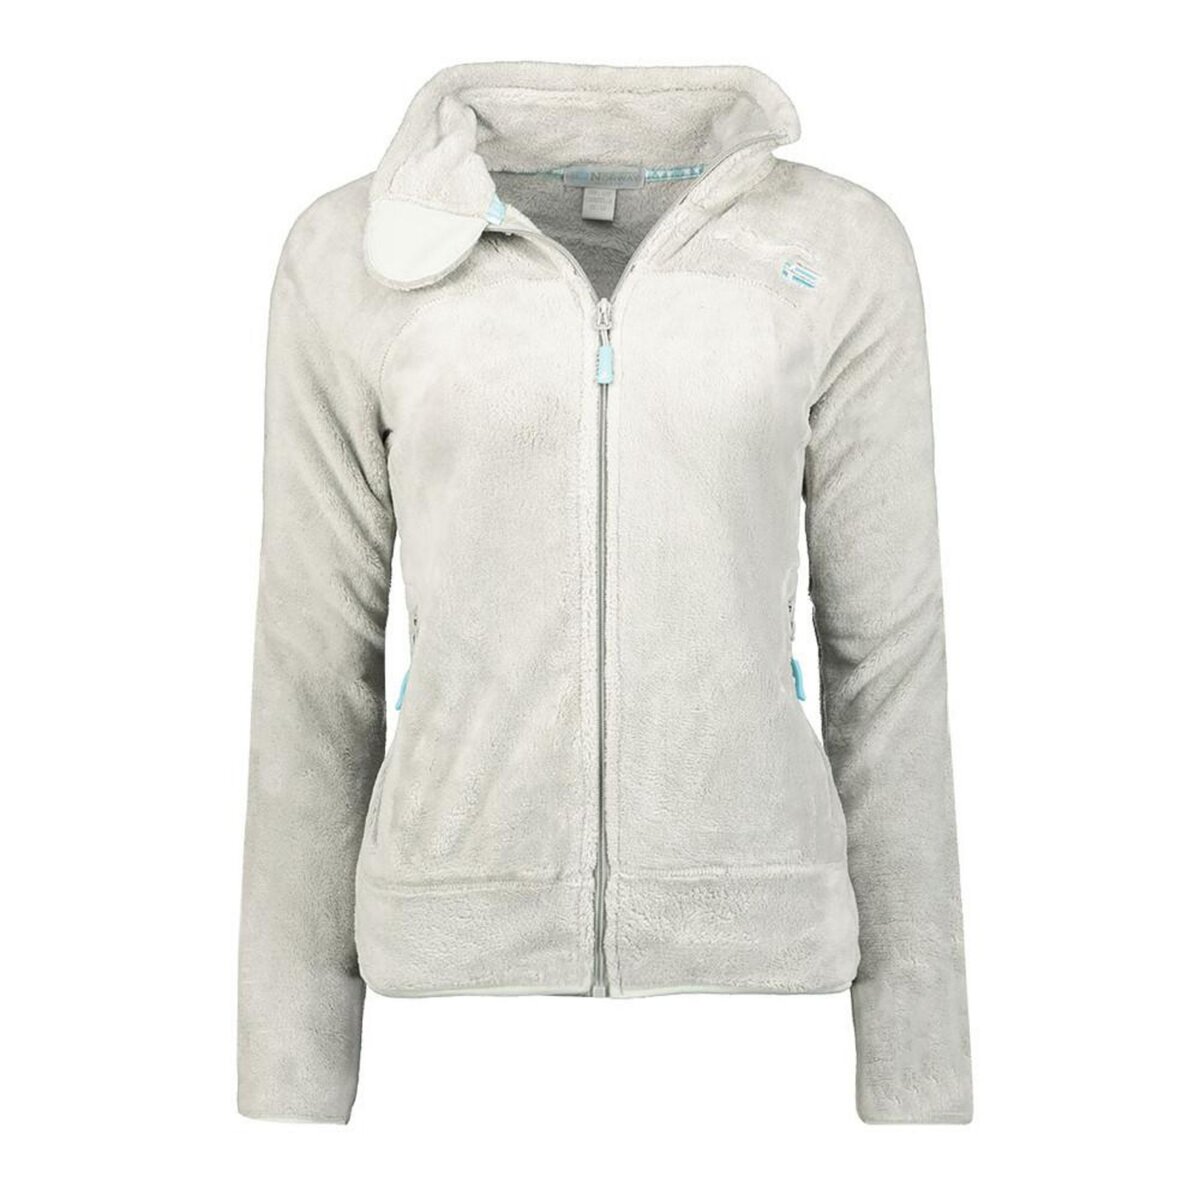 GEOGRAPHICAL NORWAY Veste polaire Gris Femme Geographical Norway Upaline